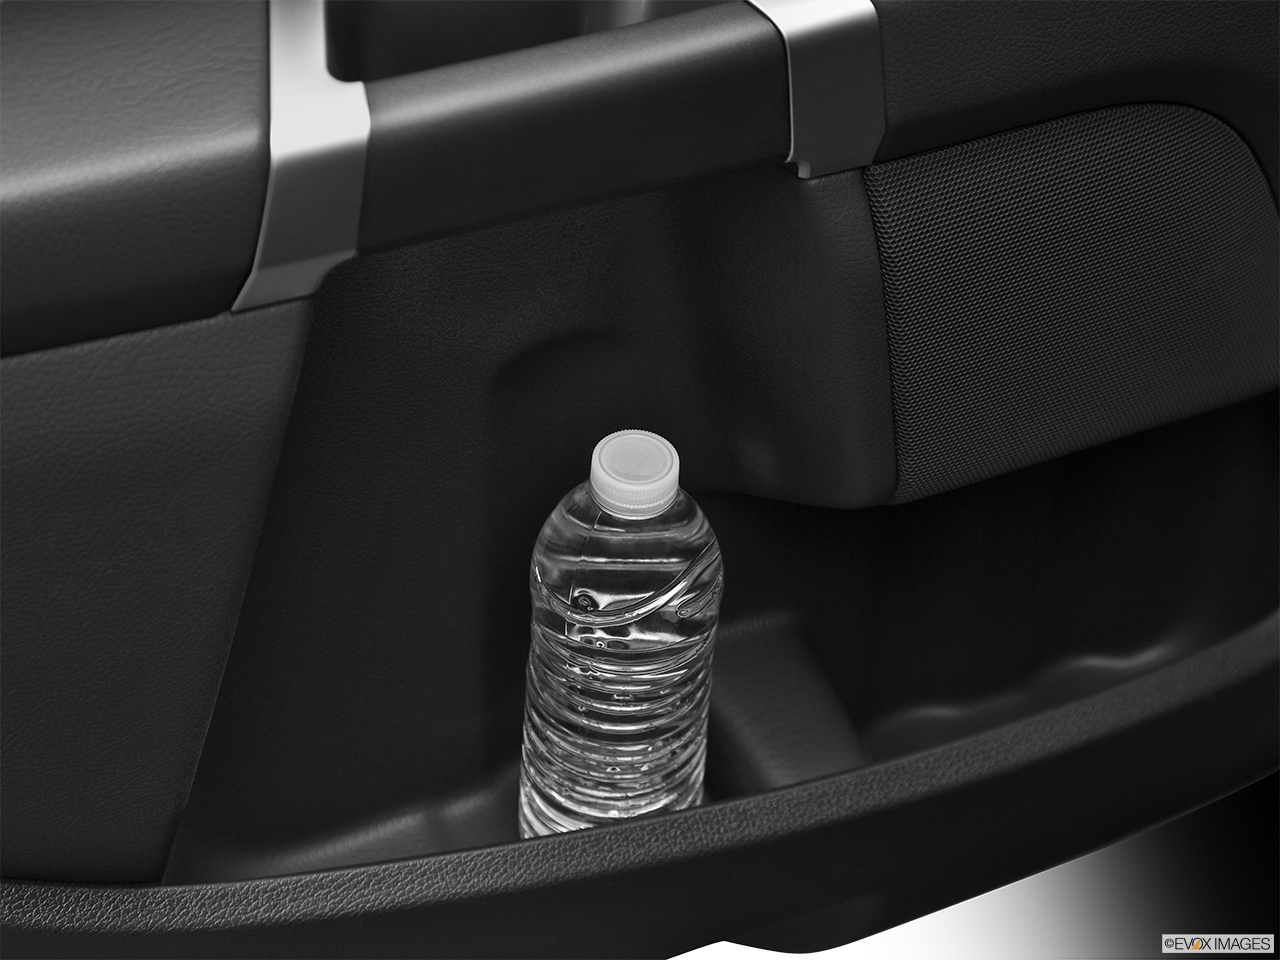 2013 Volvo XC90 3.2 FWD Base Second row side cup holder with coffee prop, or second row door cup holder with water bottle. 